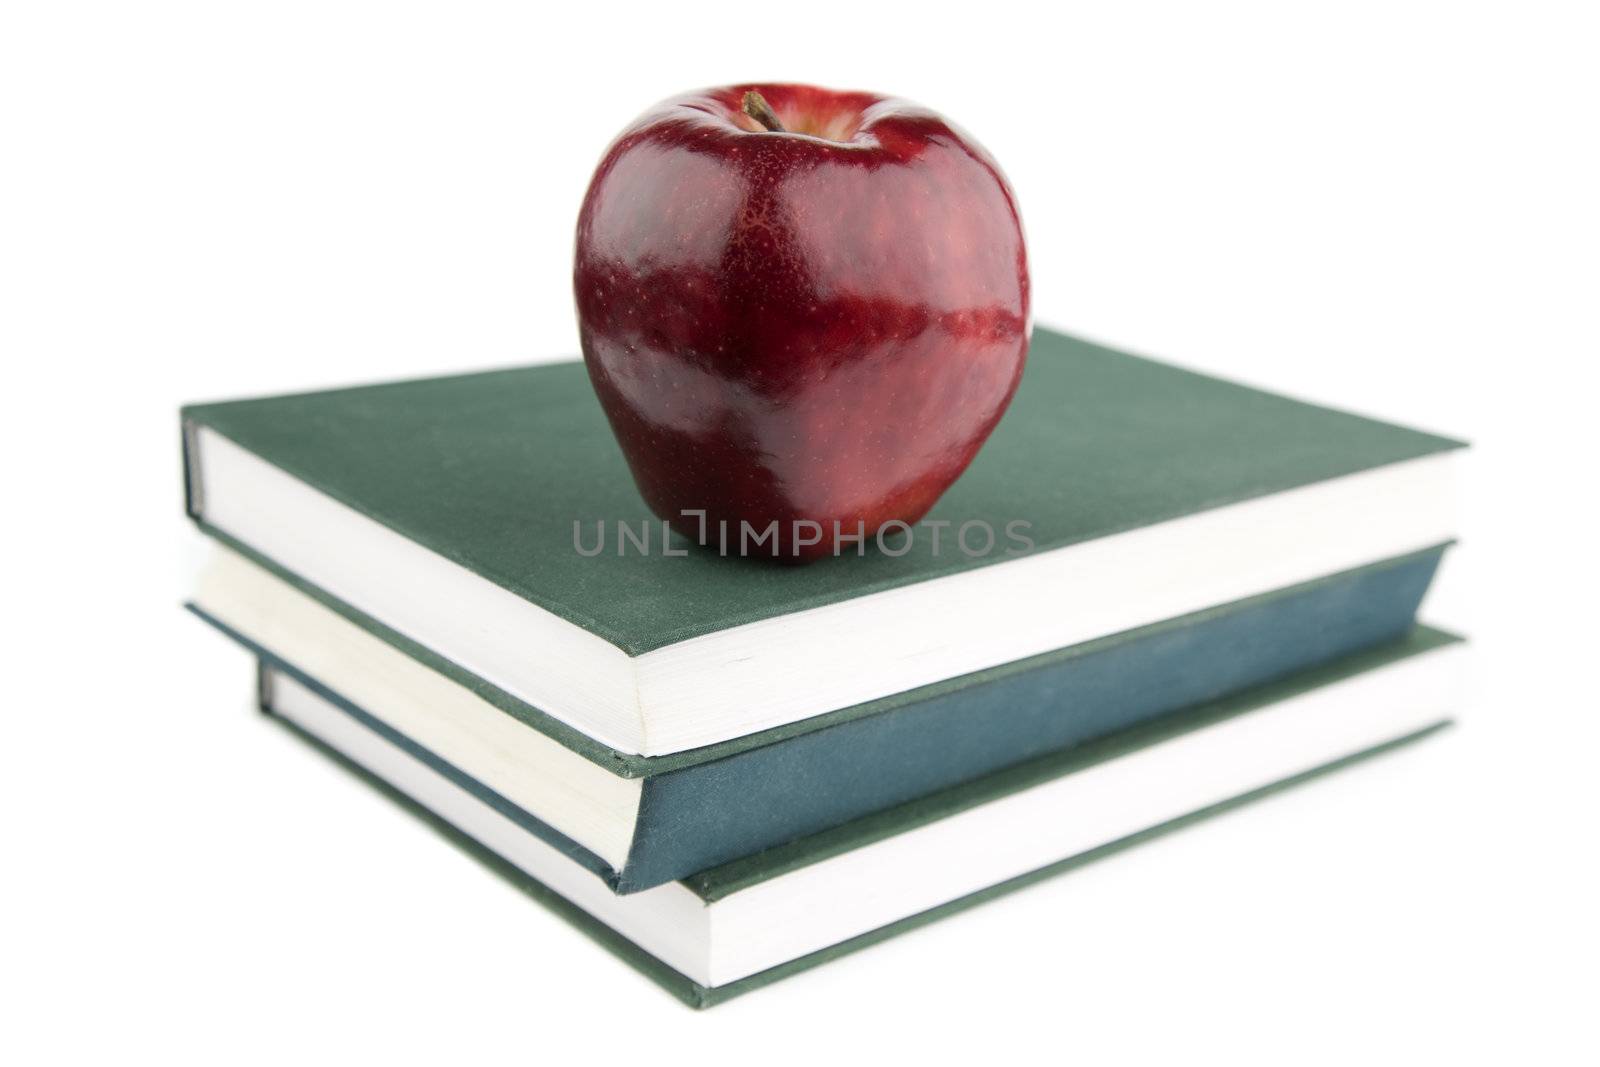 focus point on red apple and nearest part of green textbook